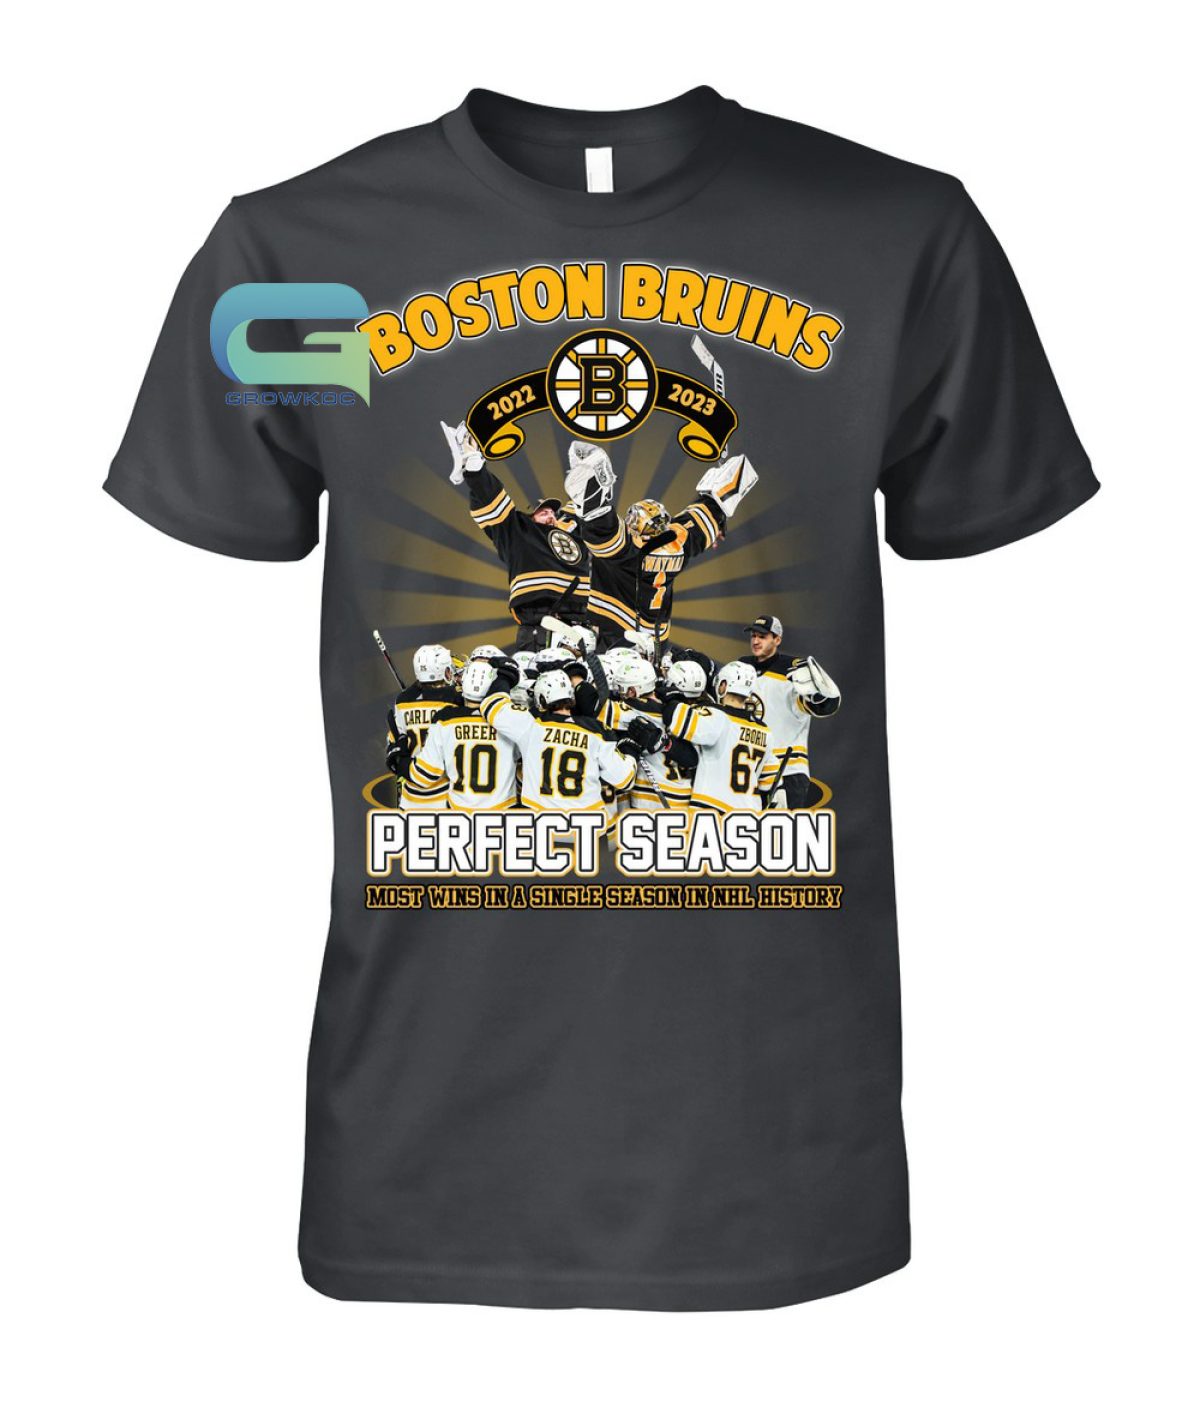 Boston Bruins NHL Fights Cancer Gear, Bruins Hockey Fights Cancer Jerseys,  Tees, Hats